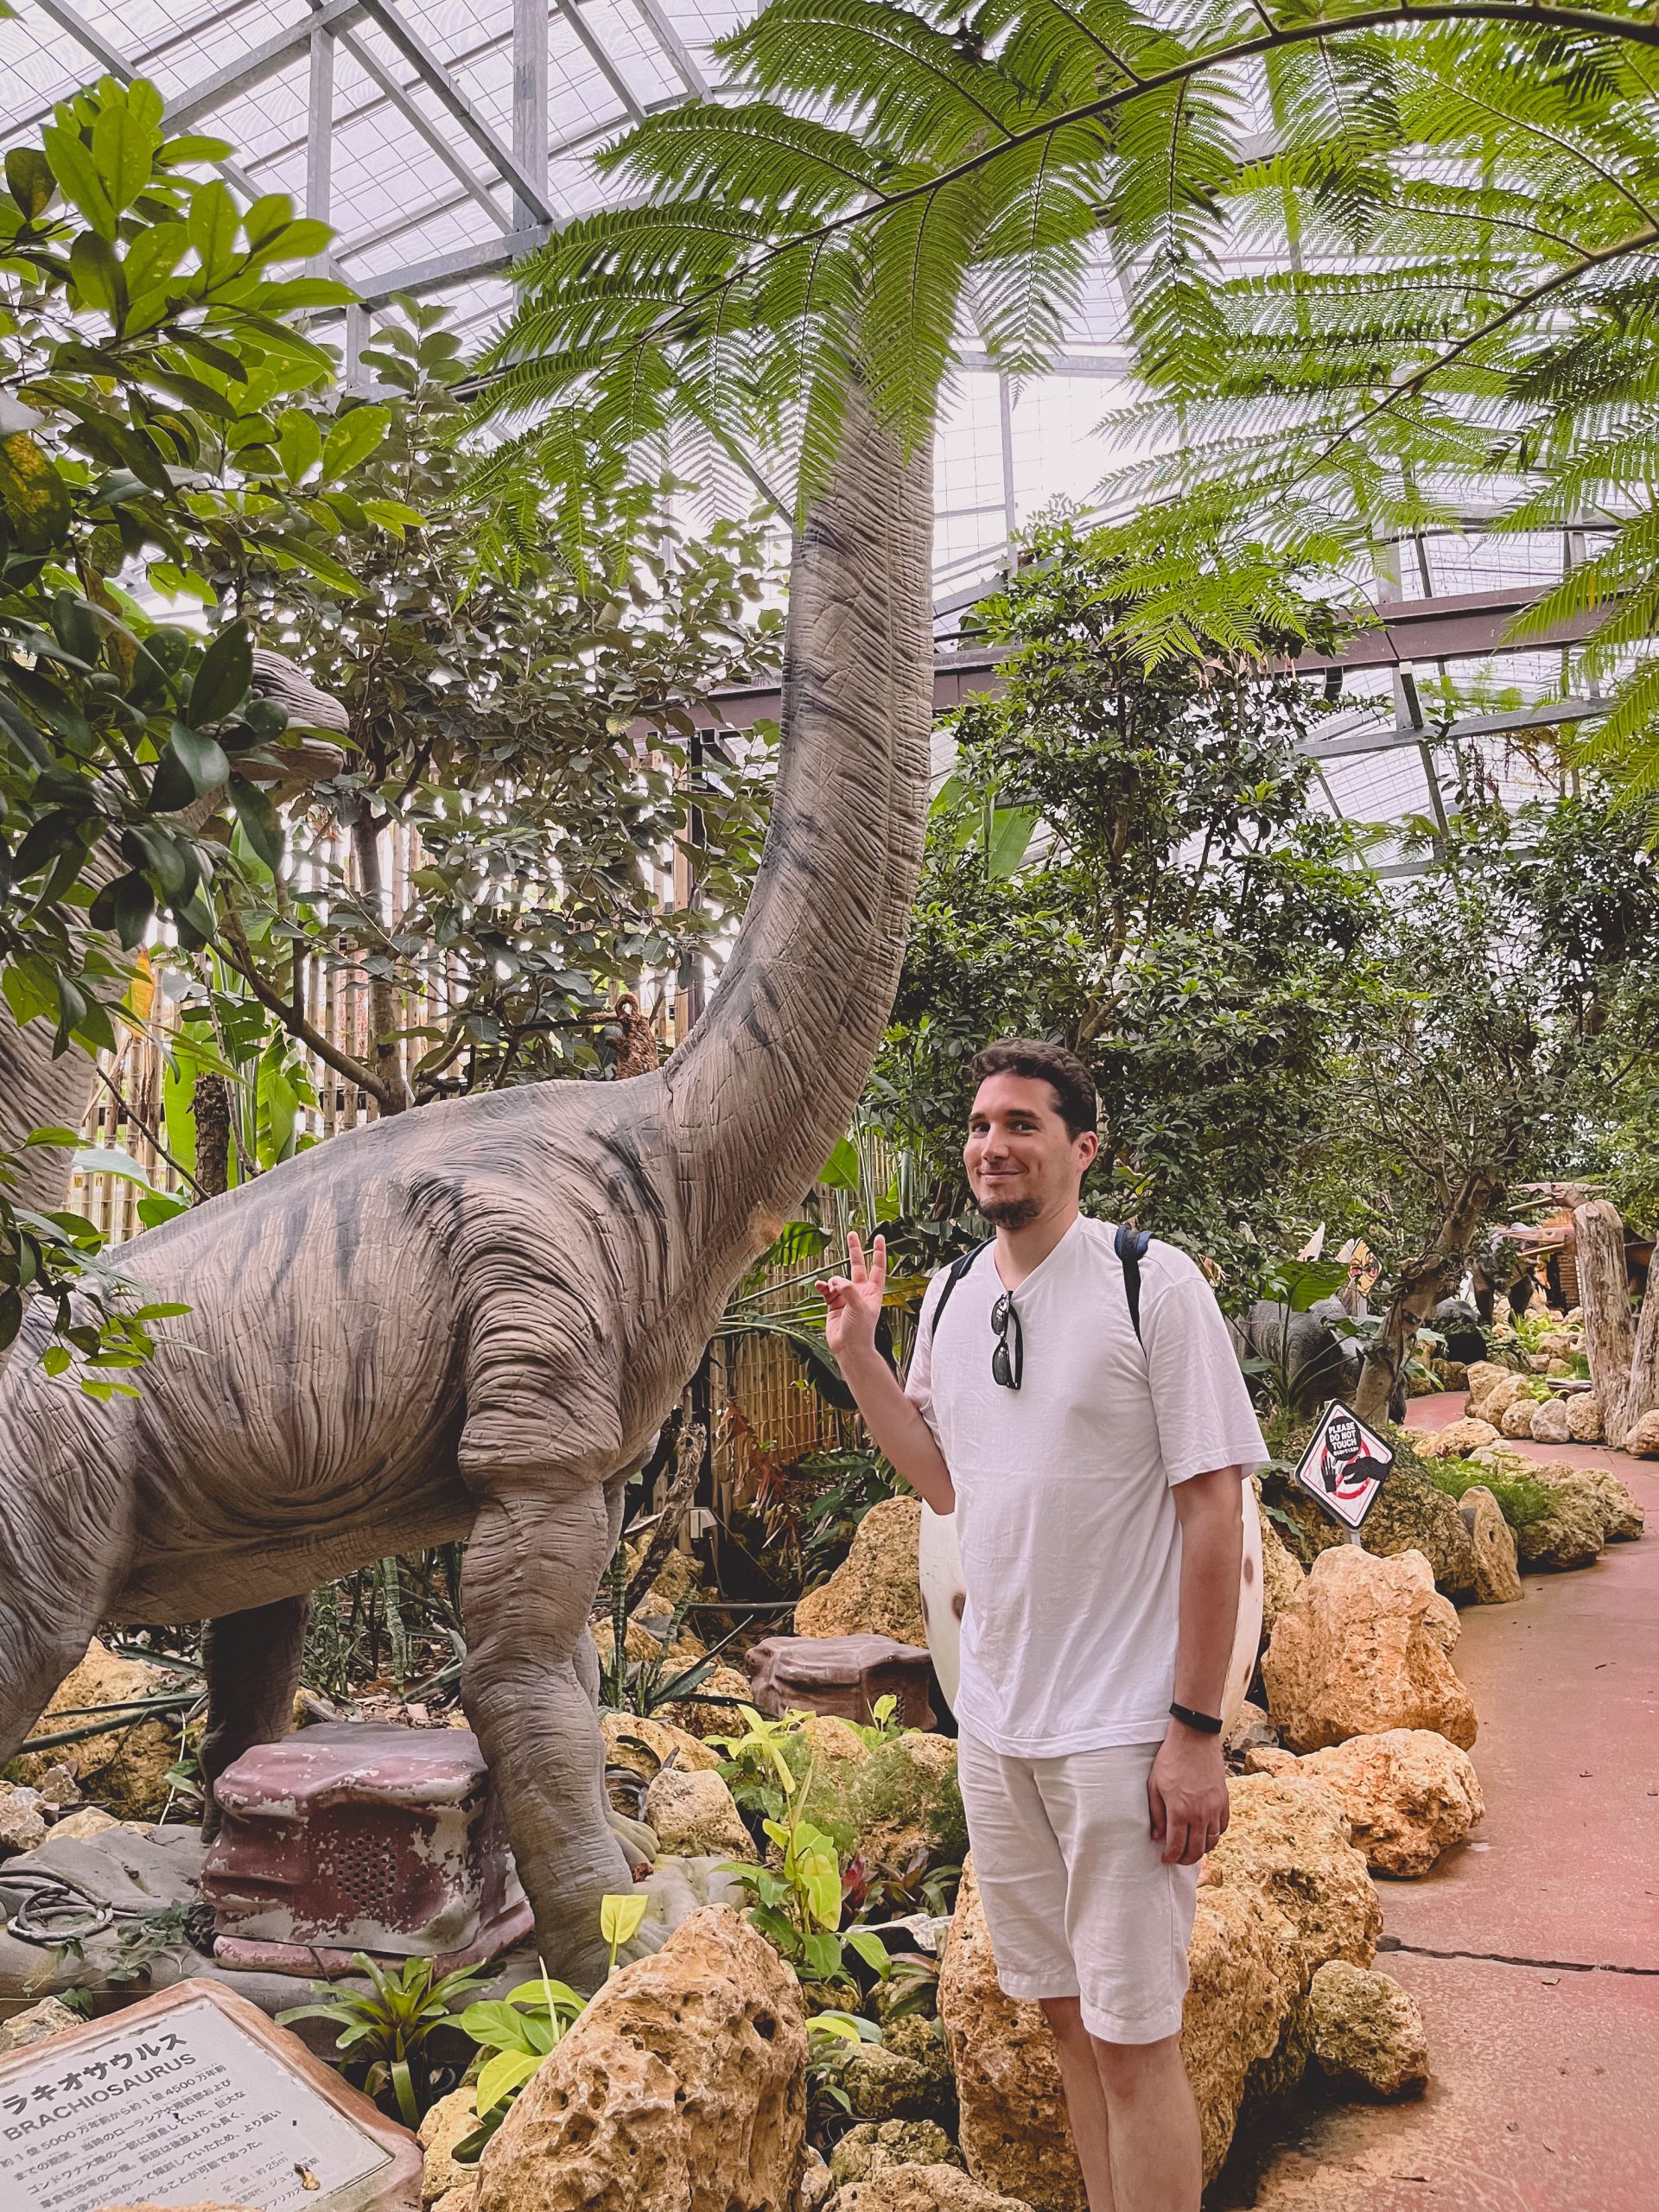 Greg being photographed at the Dino park adventure at Nago Pineapple Park